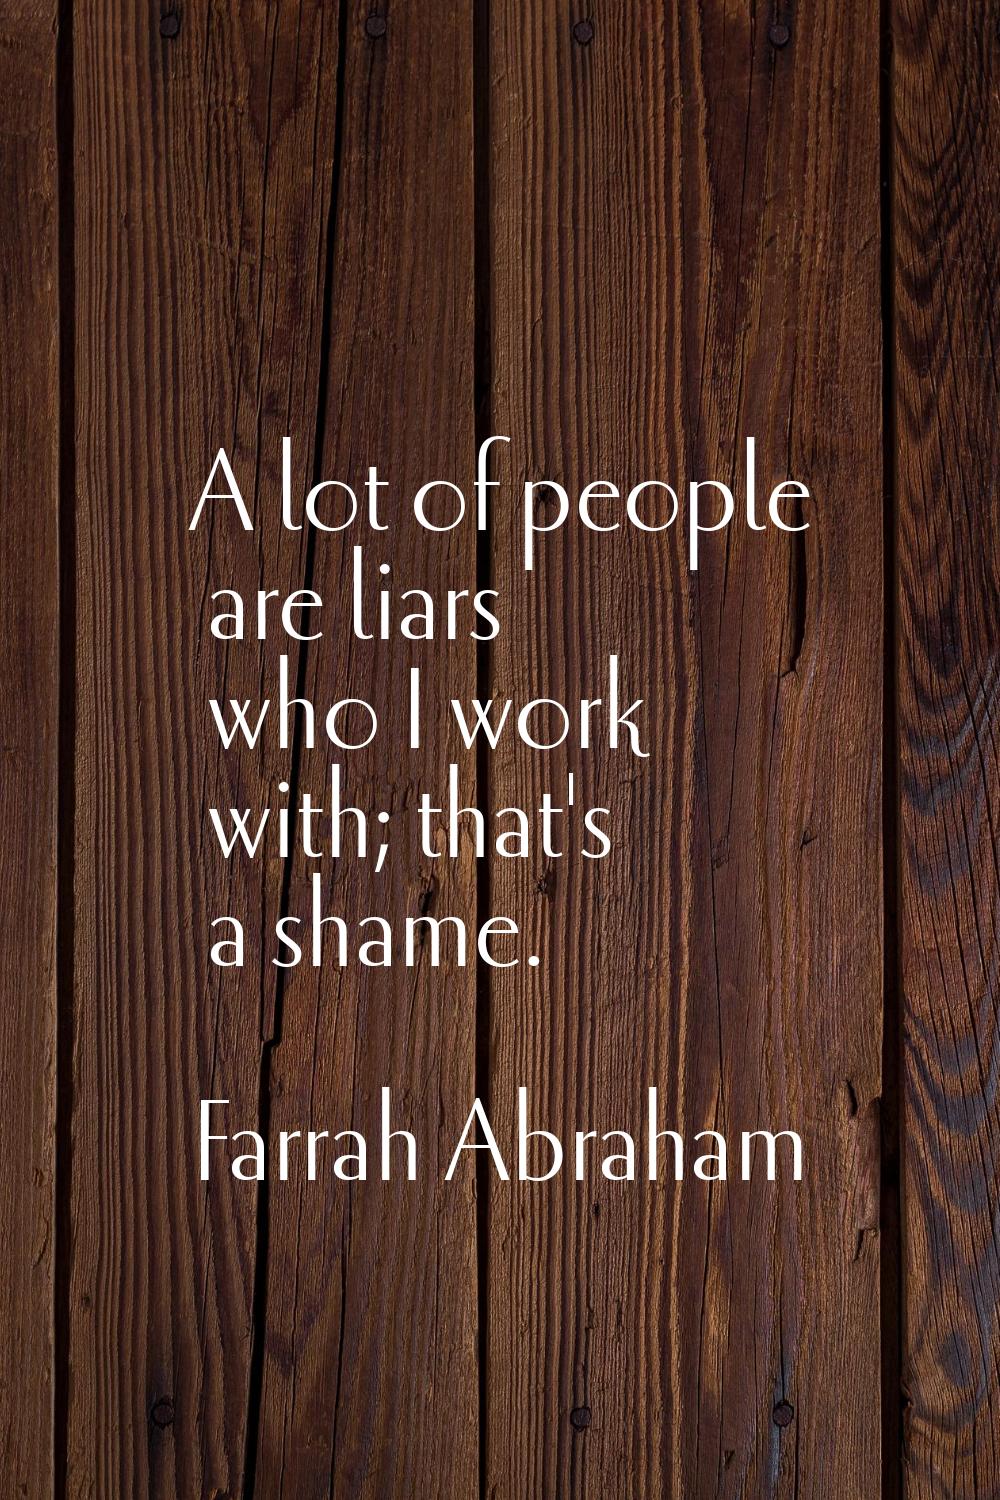 A lot of people are liars who I work with; that's a shame.